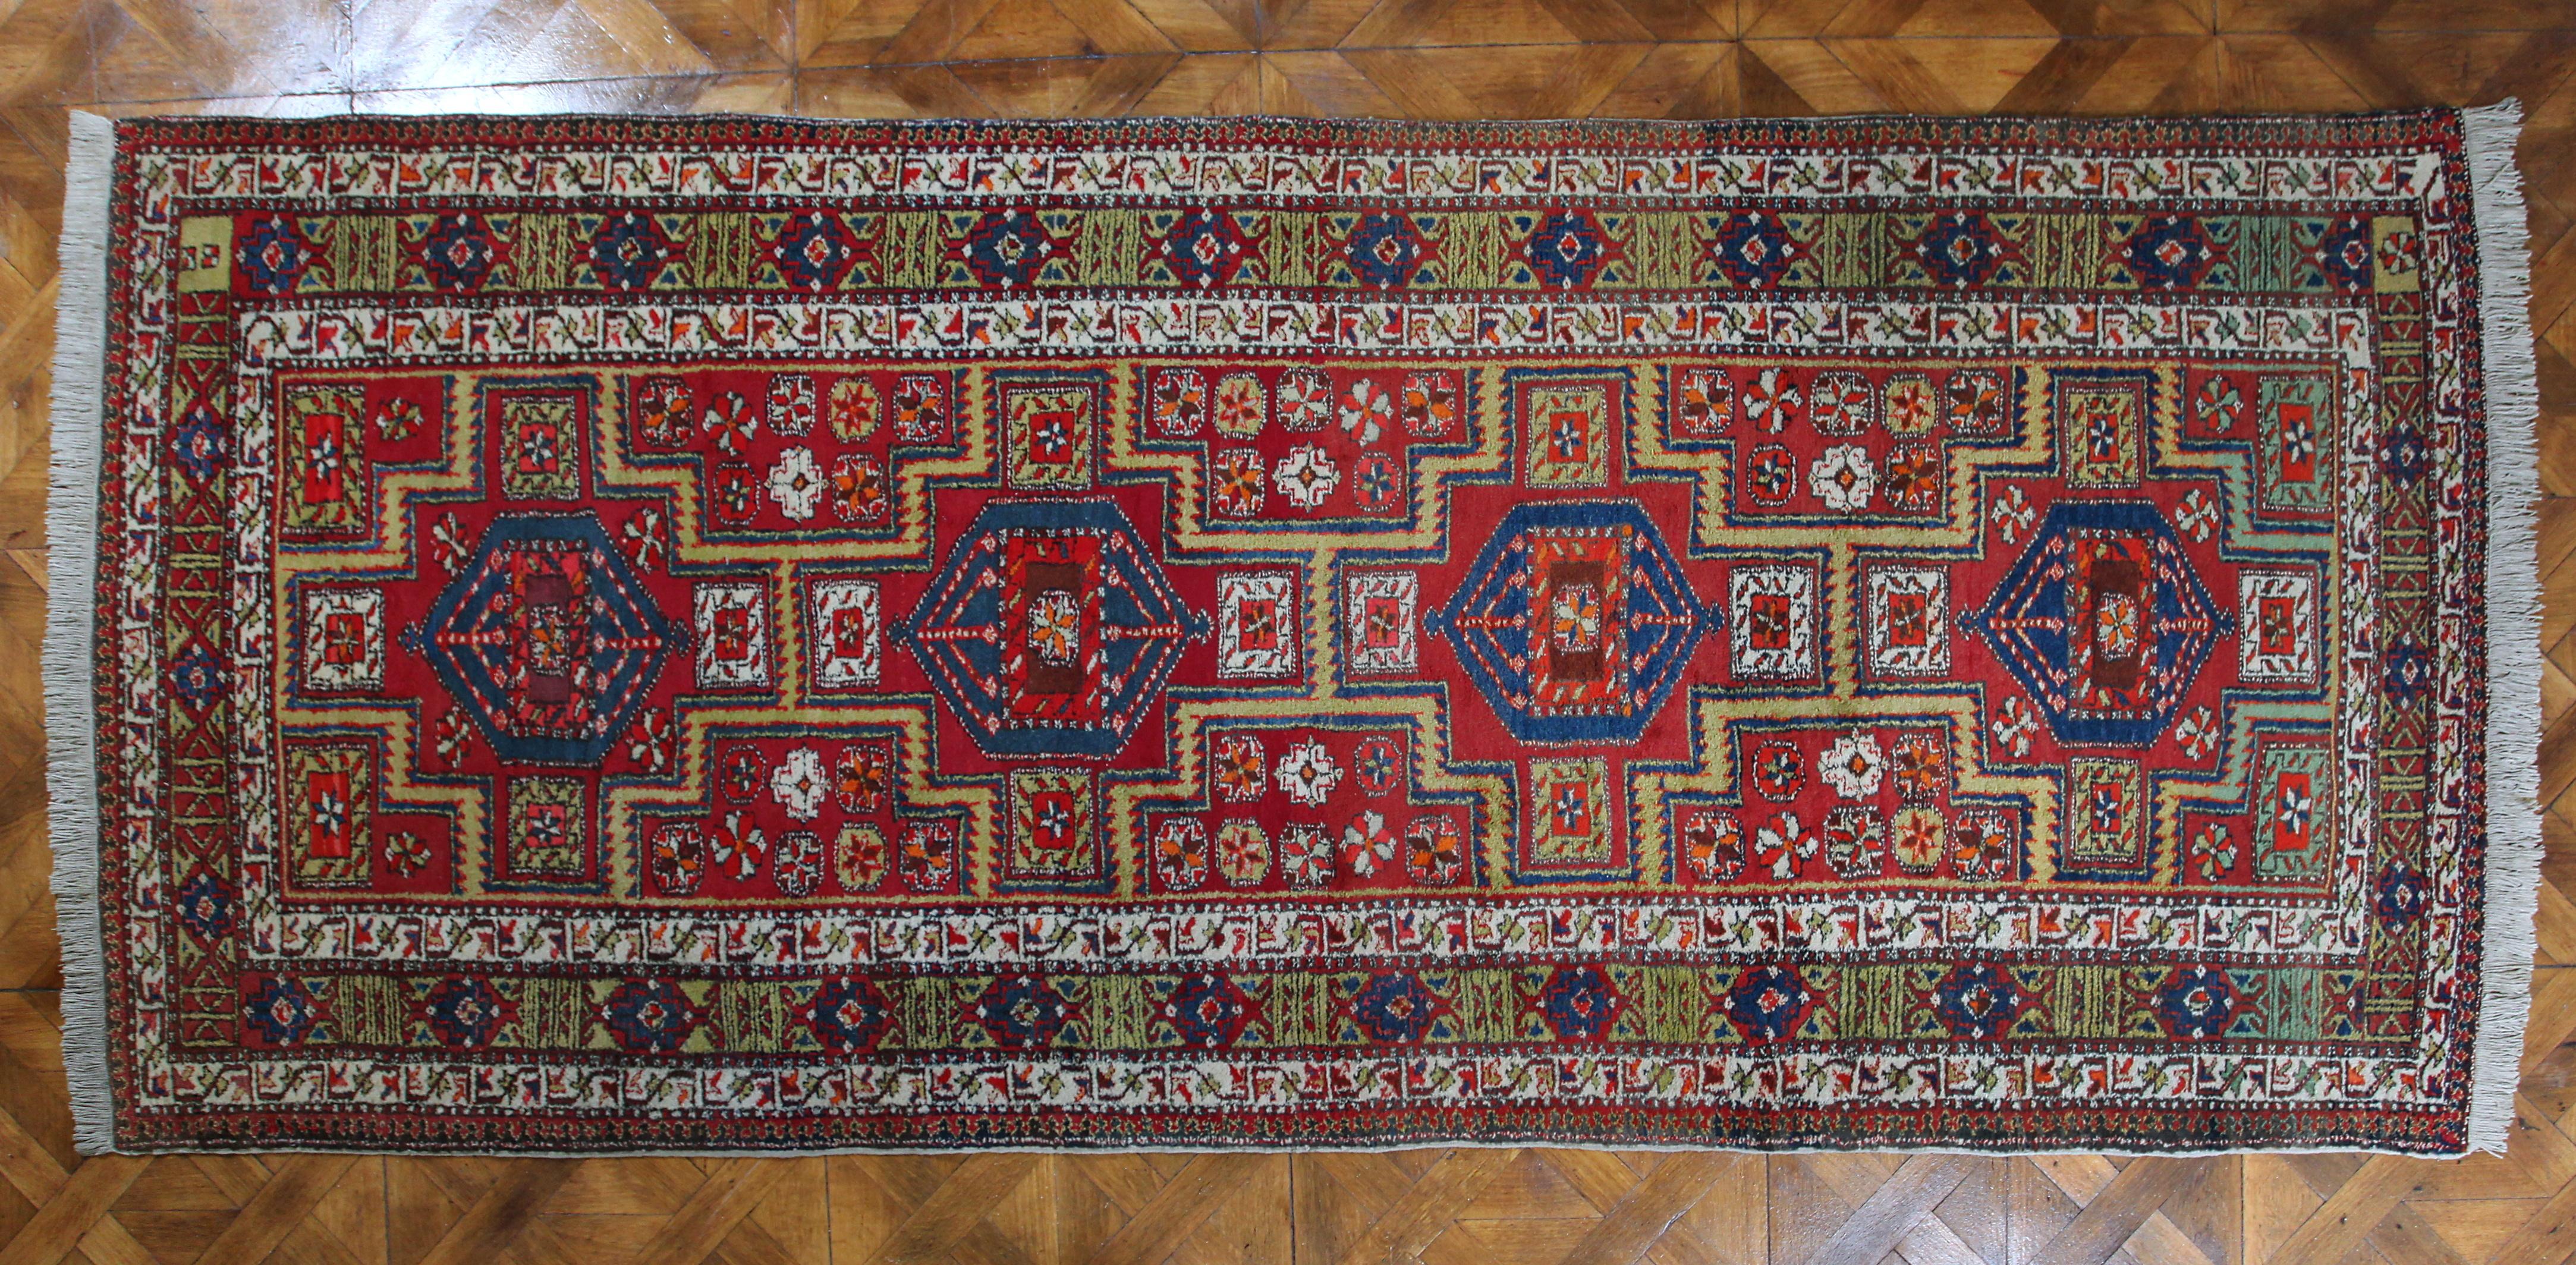 Persian carpet Beluch 372 X 161 cm

A hand-knotted Persian rug from the border region with Afghanistan. Wool pile on cotton warp. Binding density around 90,000 knots per m2. This type of carpet is very durable and is also suitable for places with a